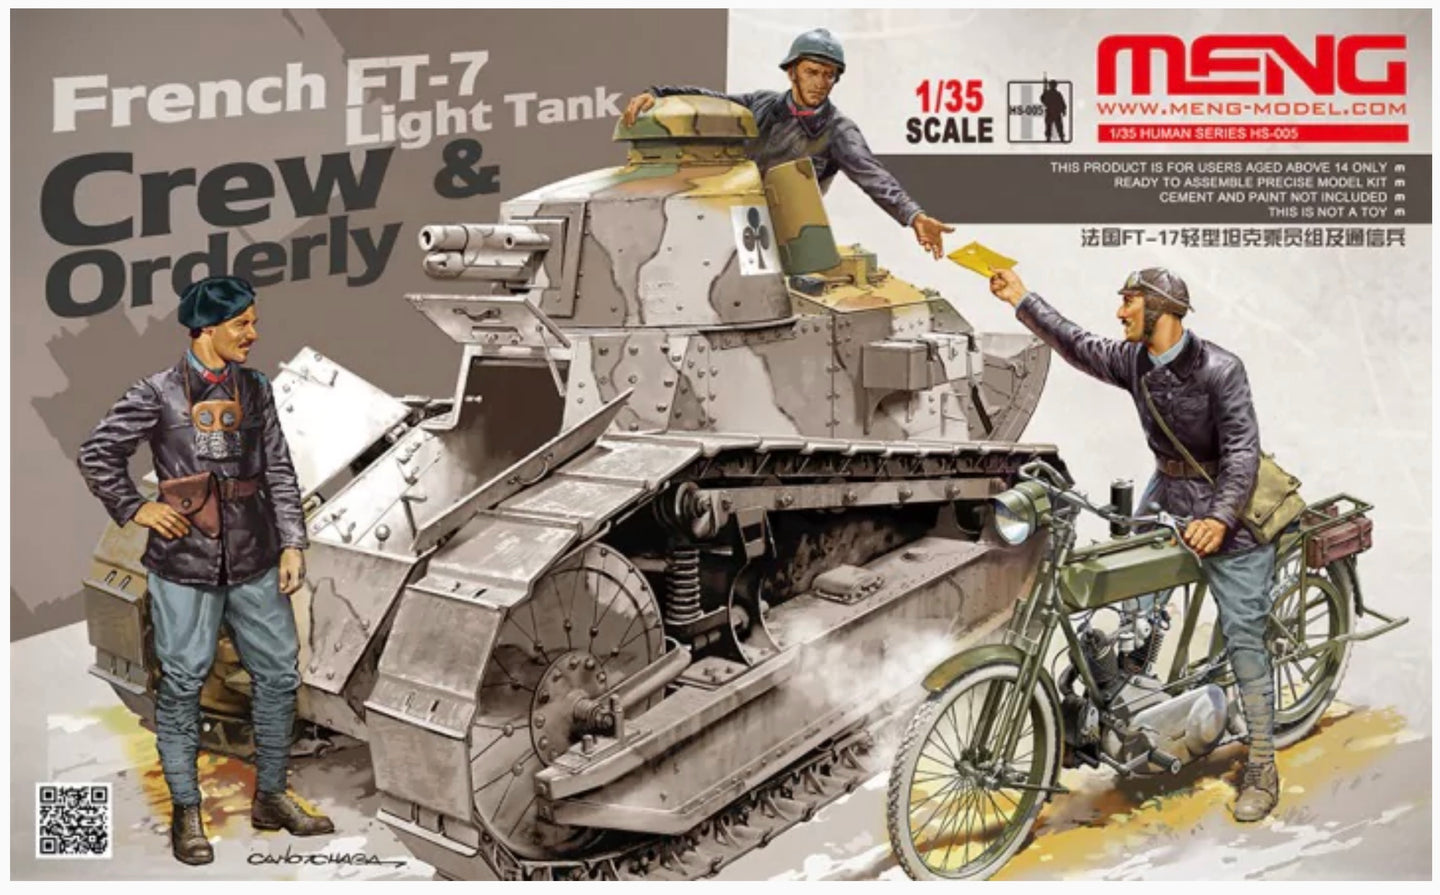 Meng 1/35 French Ft-17 Crew and Orderly HS-005